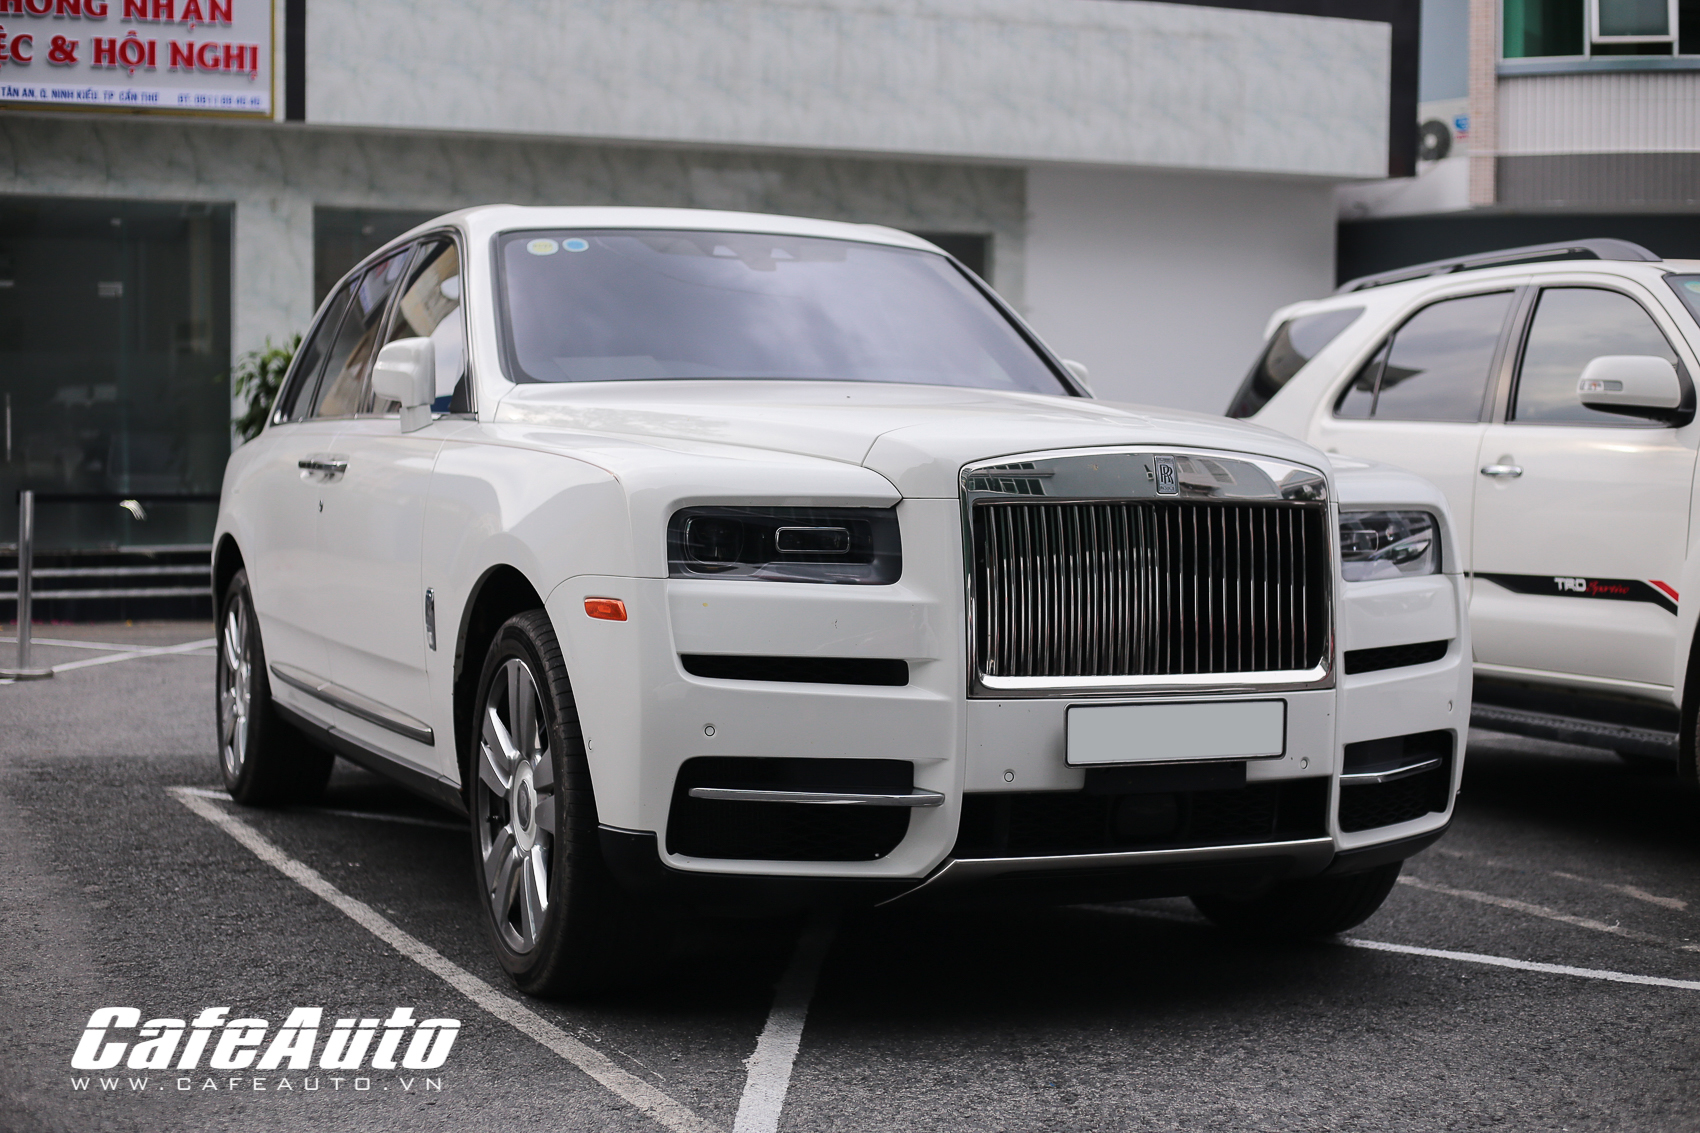 Used 2010 RollsRoyce Ghost for Sale in Saint Louis MO with Photos   CarGurus